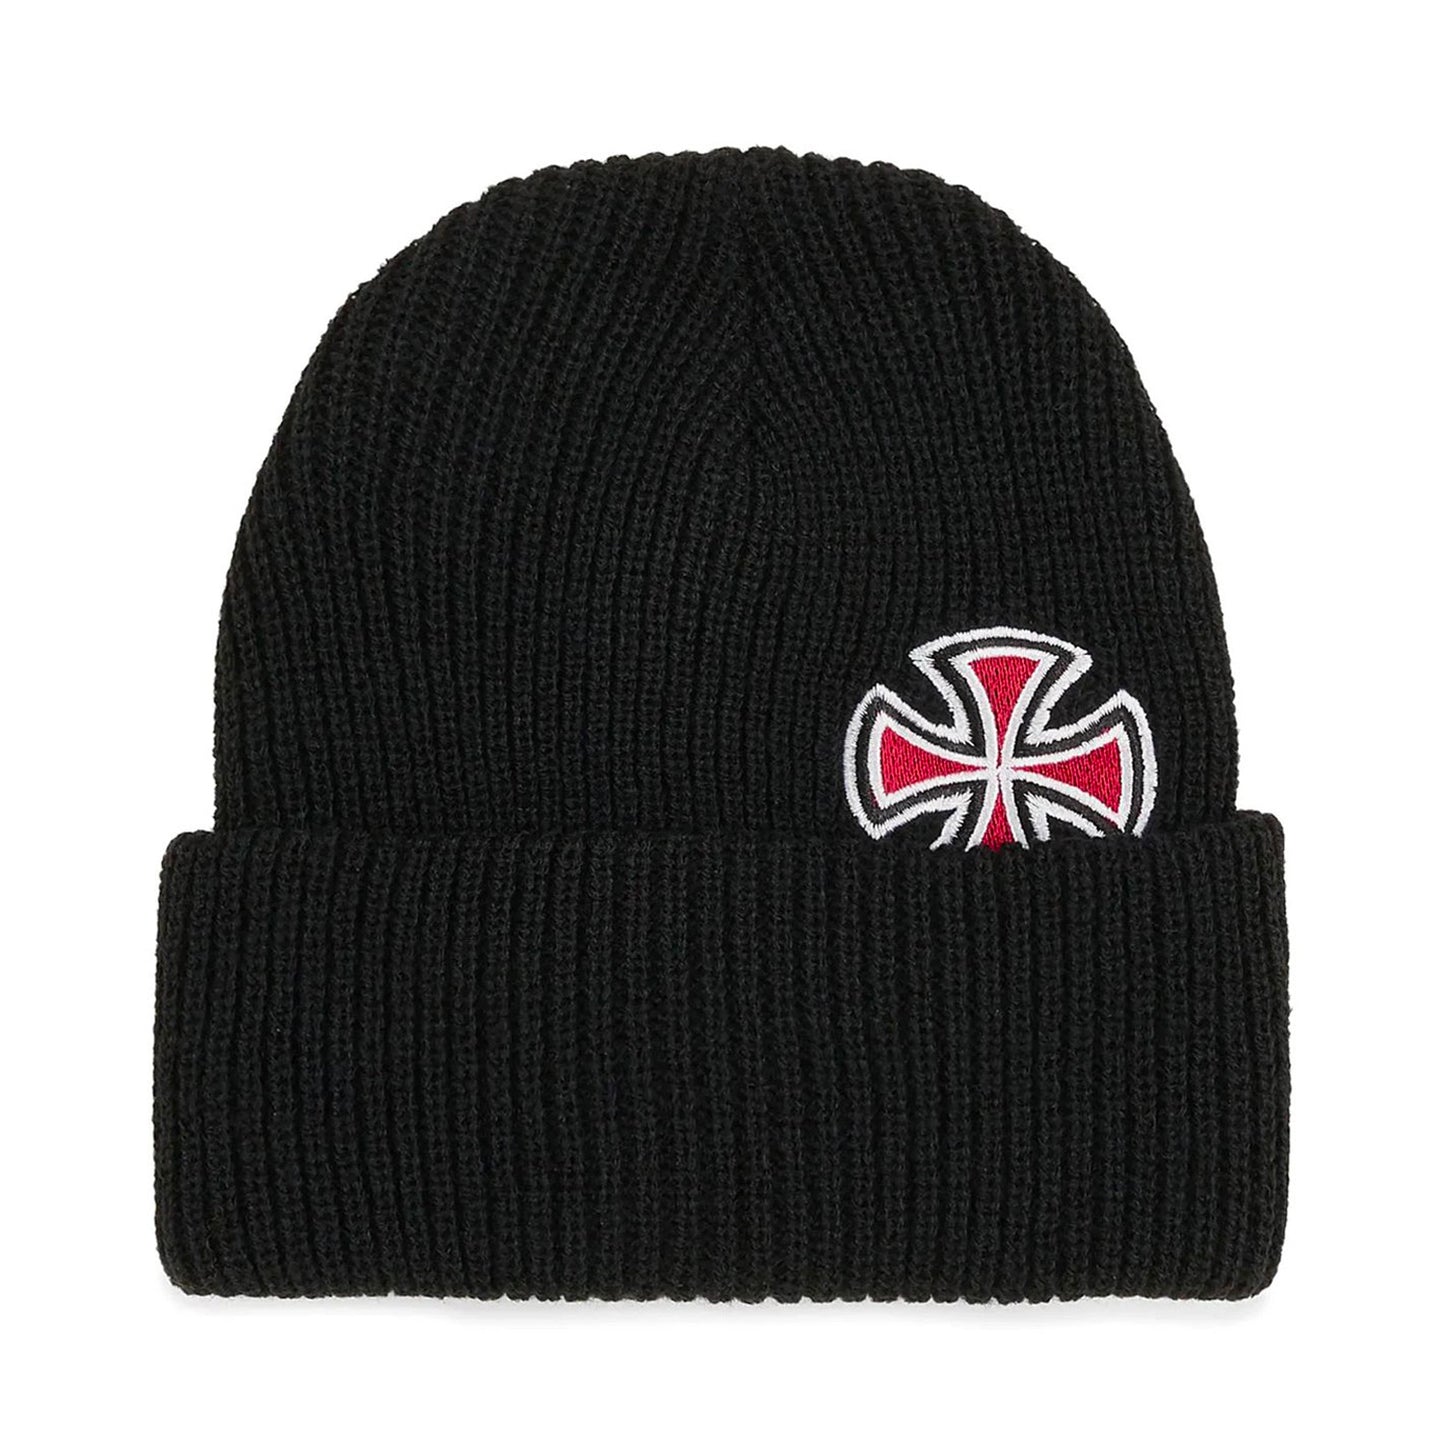 Independent Solo Cross Beanie - Black - Prime Delux Store